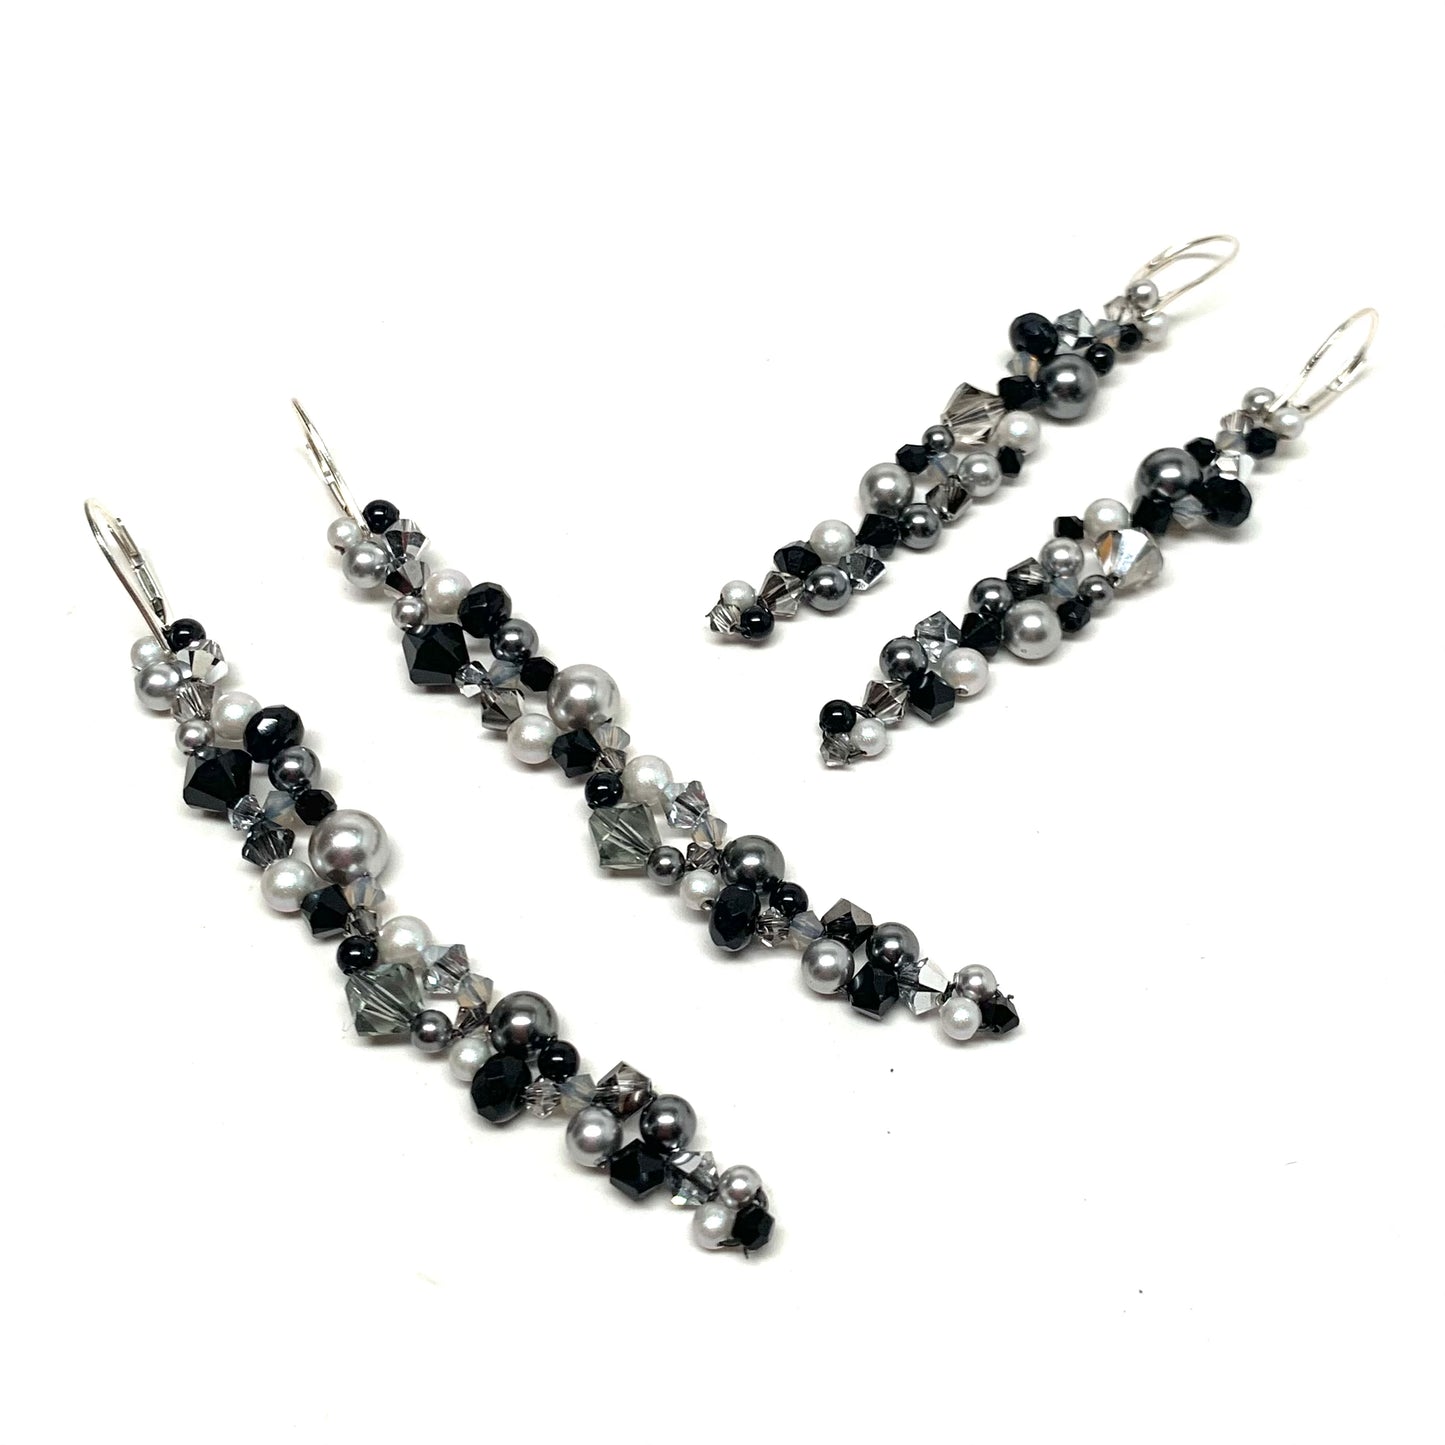 Polly Earring | Black, White and Grey